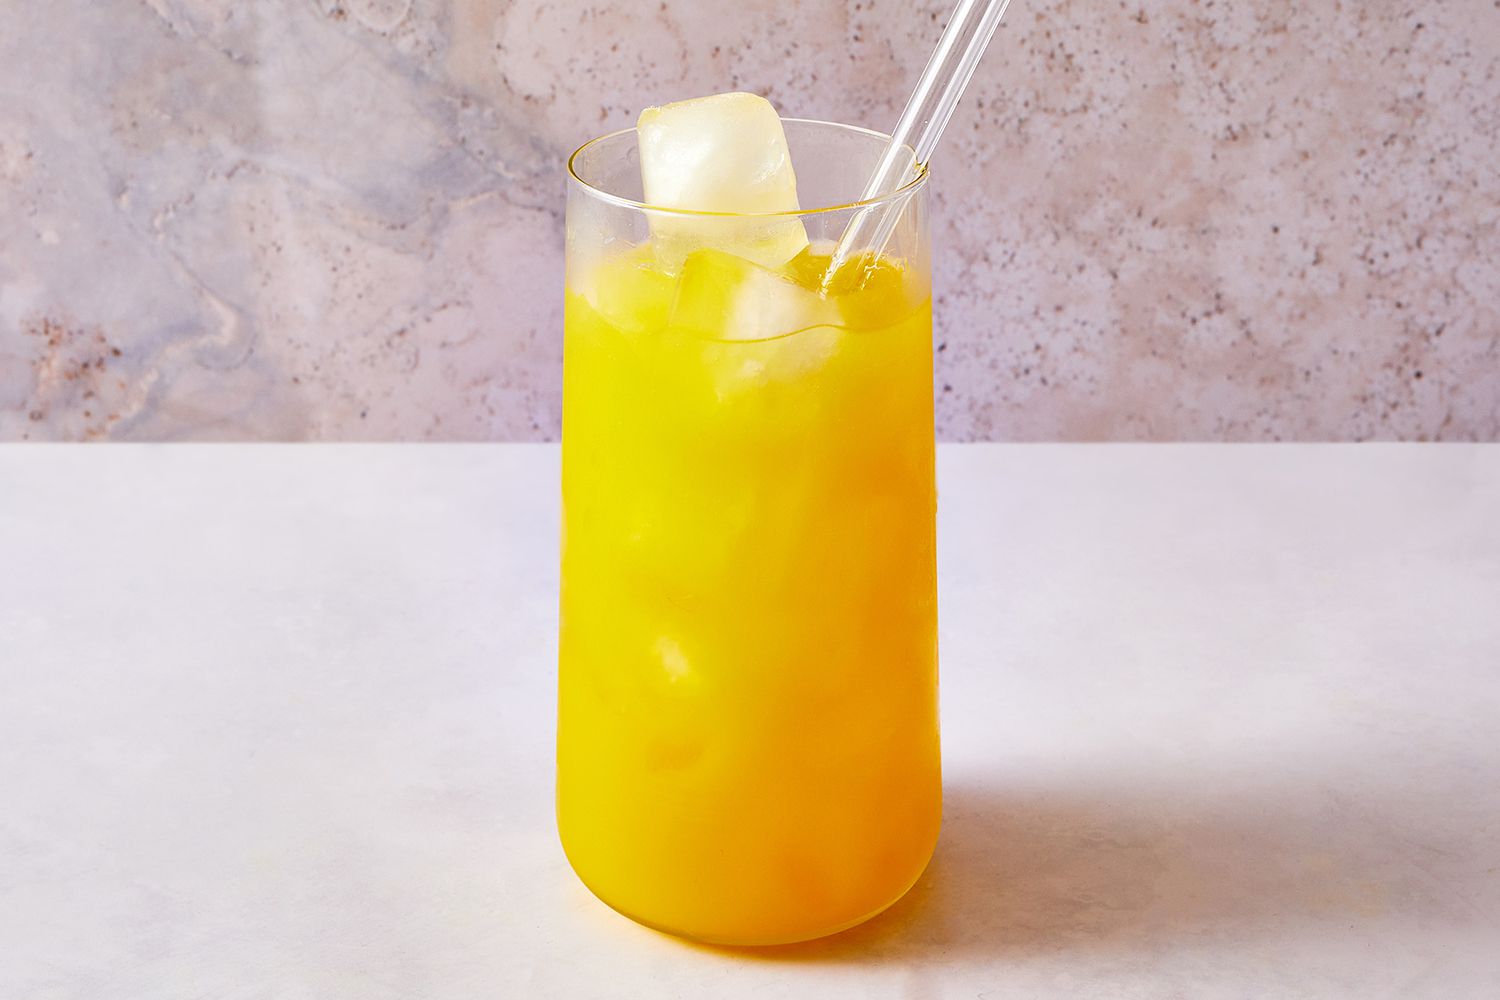 Orange juice, tequila, and ice stirred together in a cocktail glass